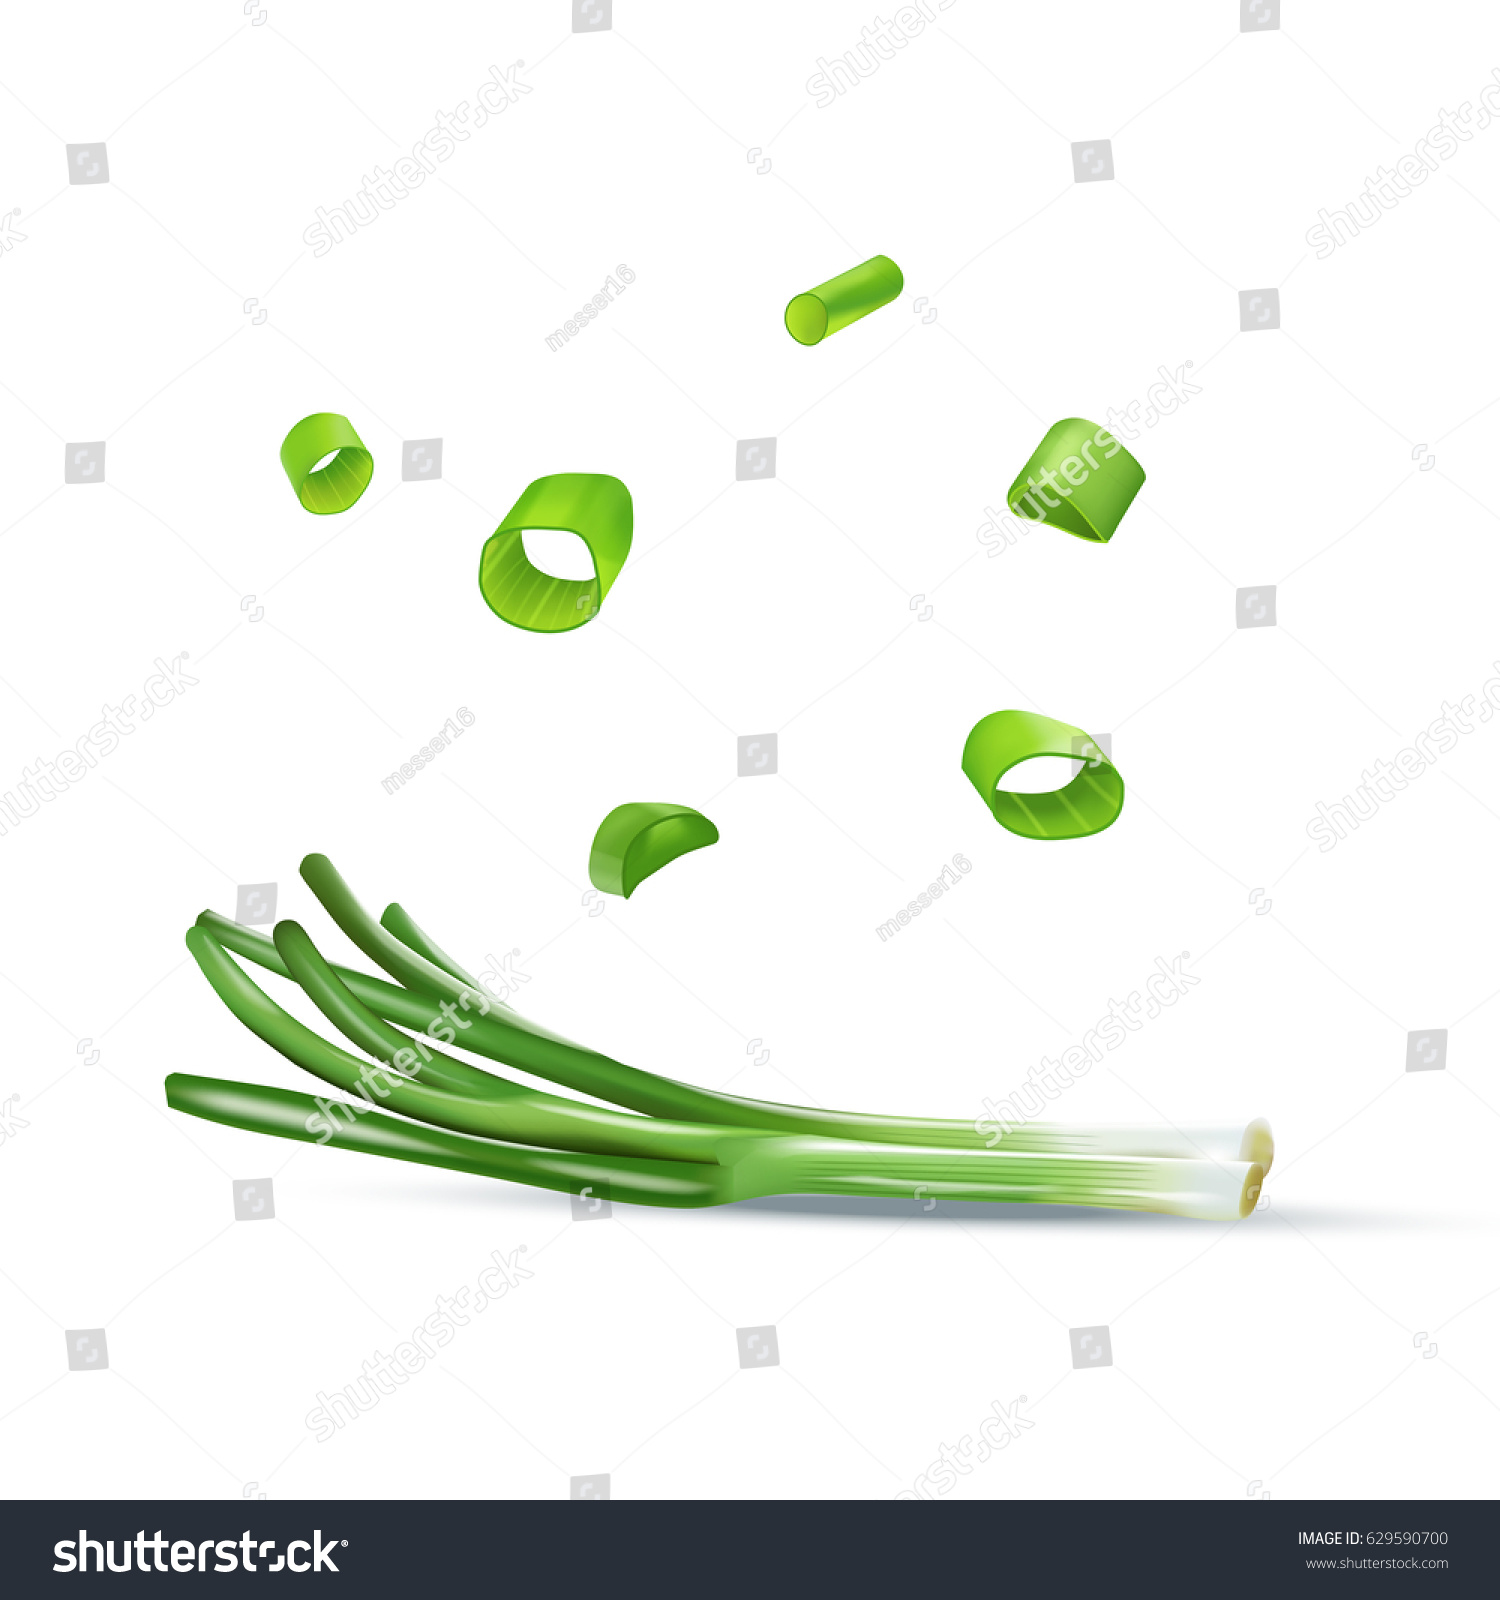 SVG of Vector realistic illustration of spring onion. Colorful greens. svg